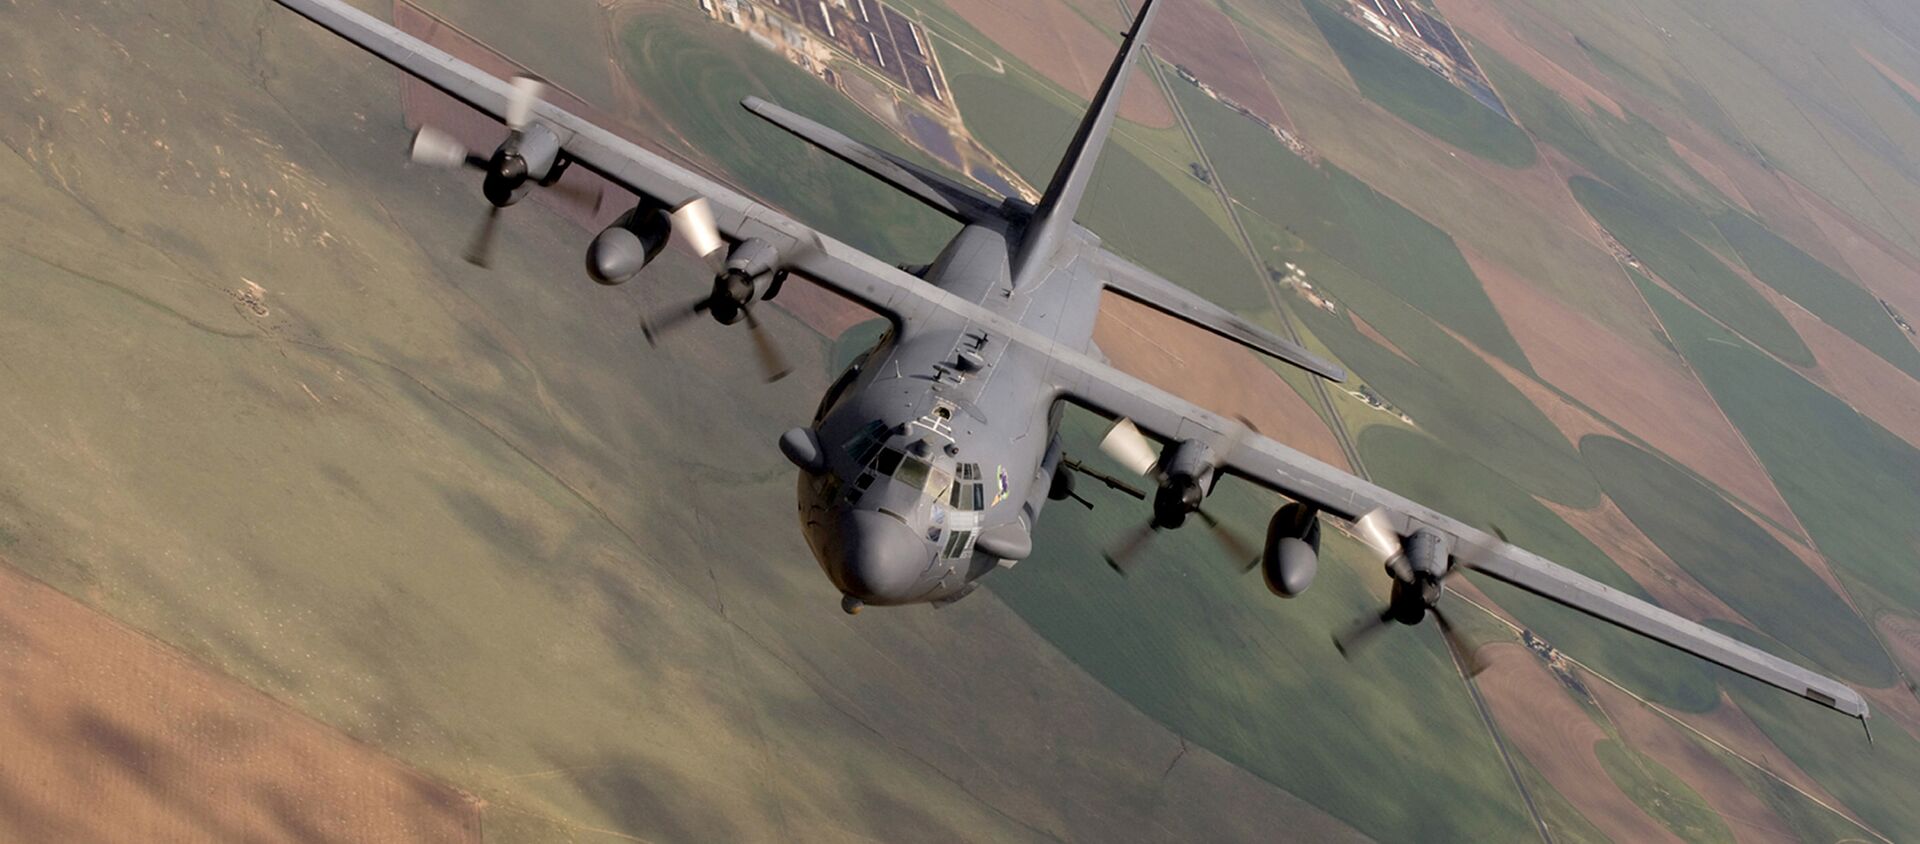 AC-130 Spectre from the 16th Special Operations Squadron flying a training mission at Cannon Air Force Base, N. M. Inside the intensive care unit of the Doctors Without Borders hospital in Northern Afghanistan in the early hours of Oct. 3, 2015 - Sputnik International, 1920, 07.08.2021